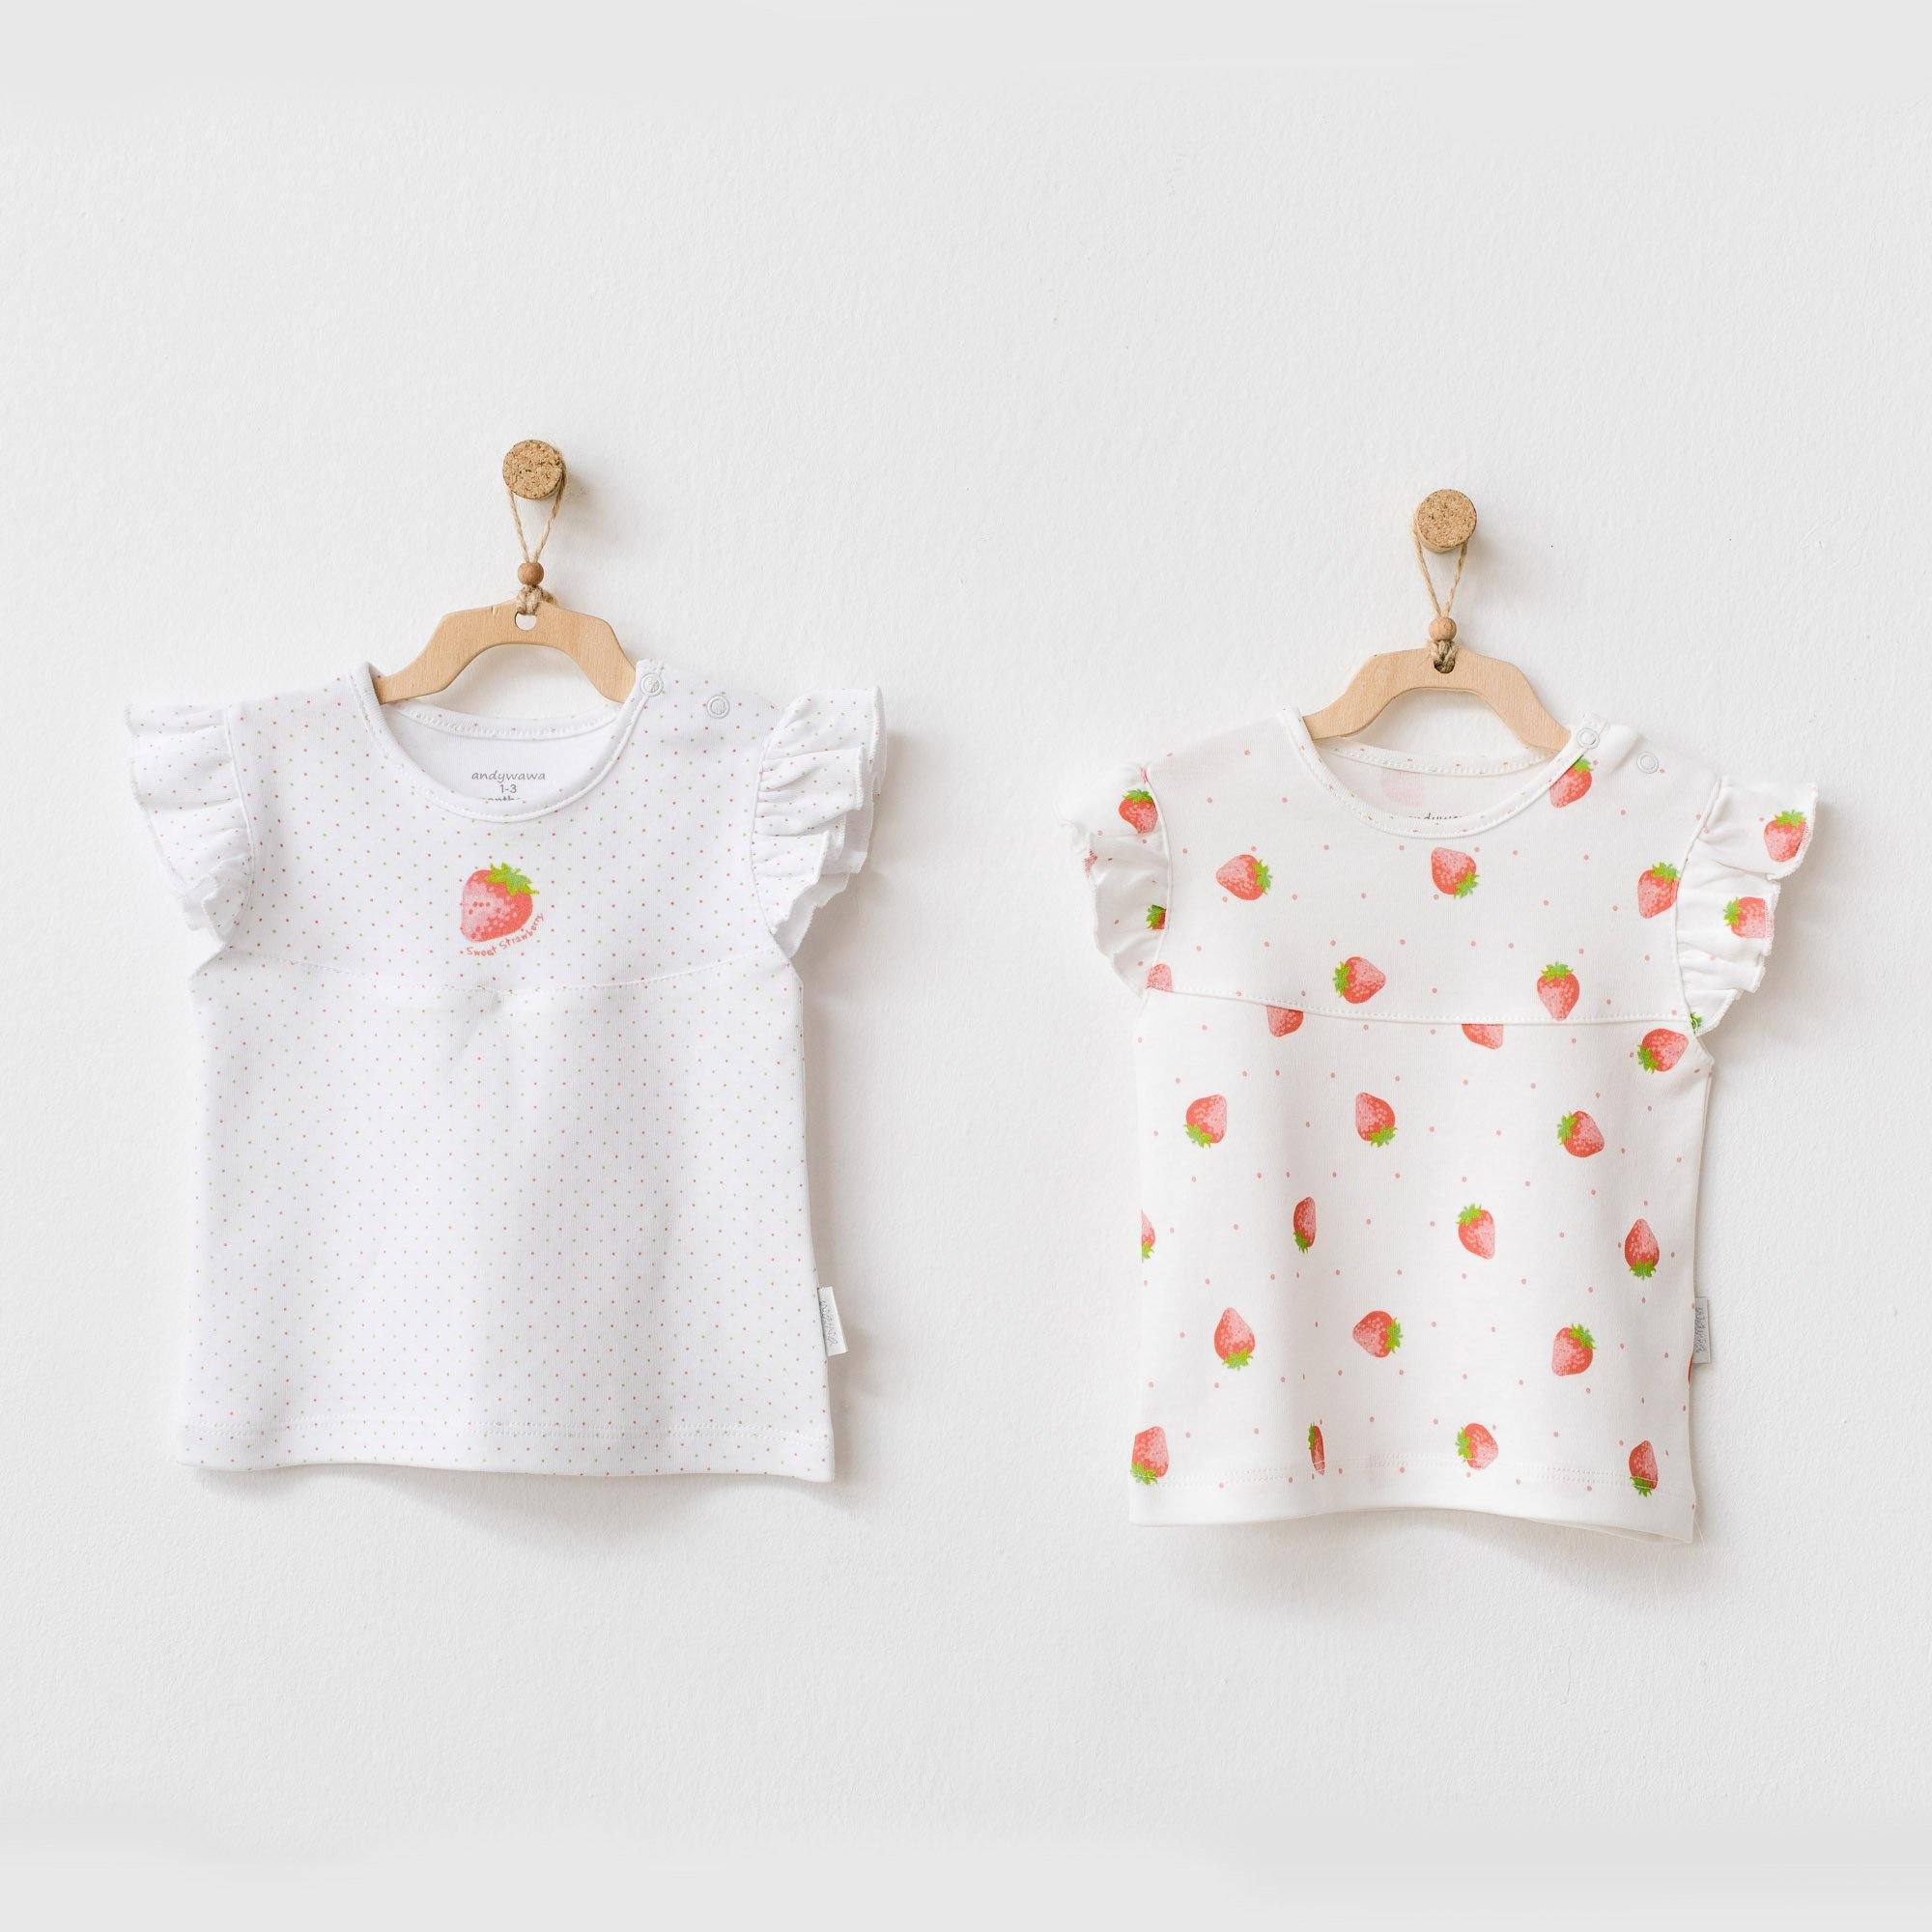 Strawberry Picnic Time - 2 Pieces Girls' T-Shirts Set - Strawberry Picnic Time - 2 Pieces Girls' T-Shirts Set - 1-3 Months - Andywawa - Melymod